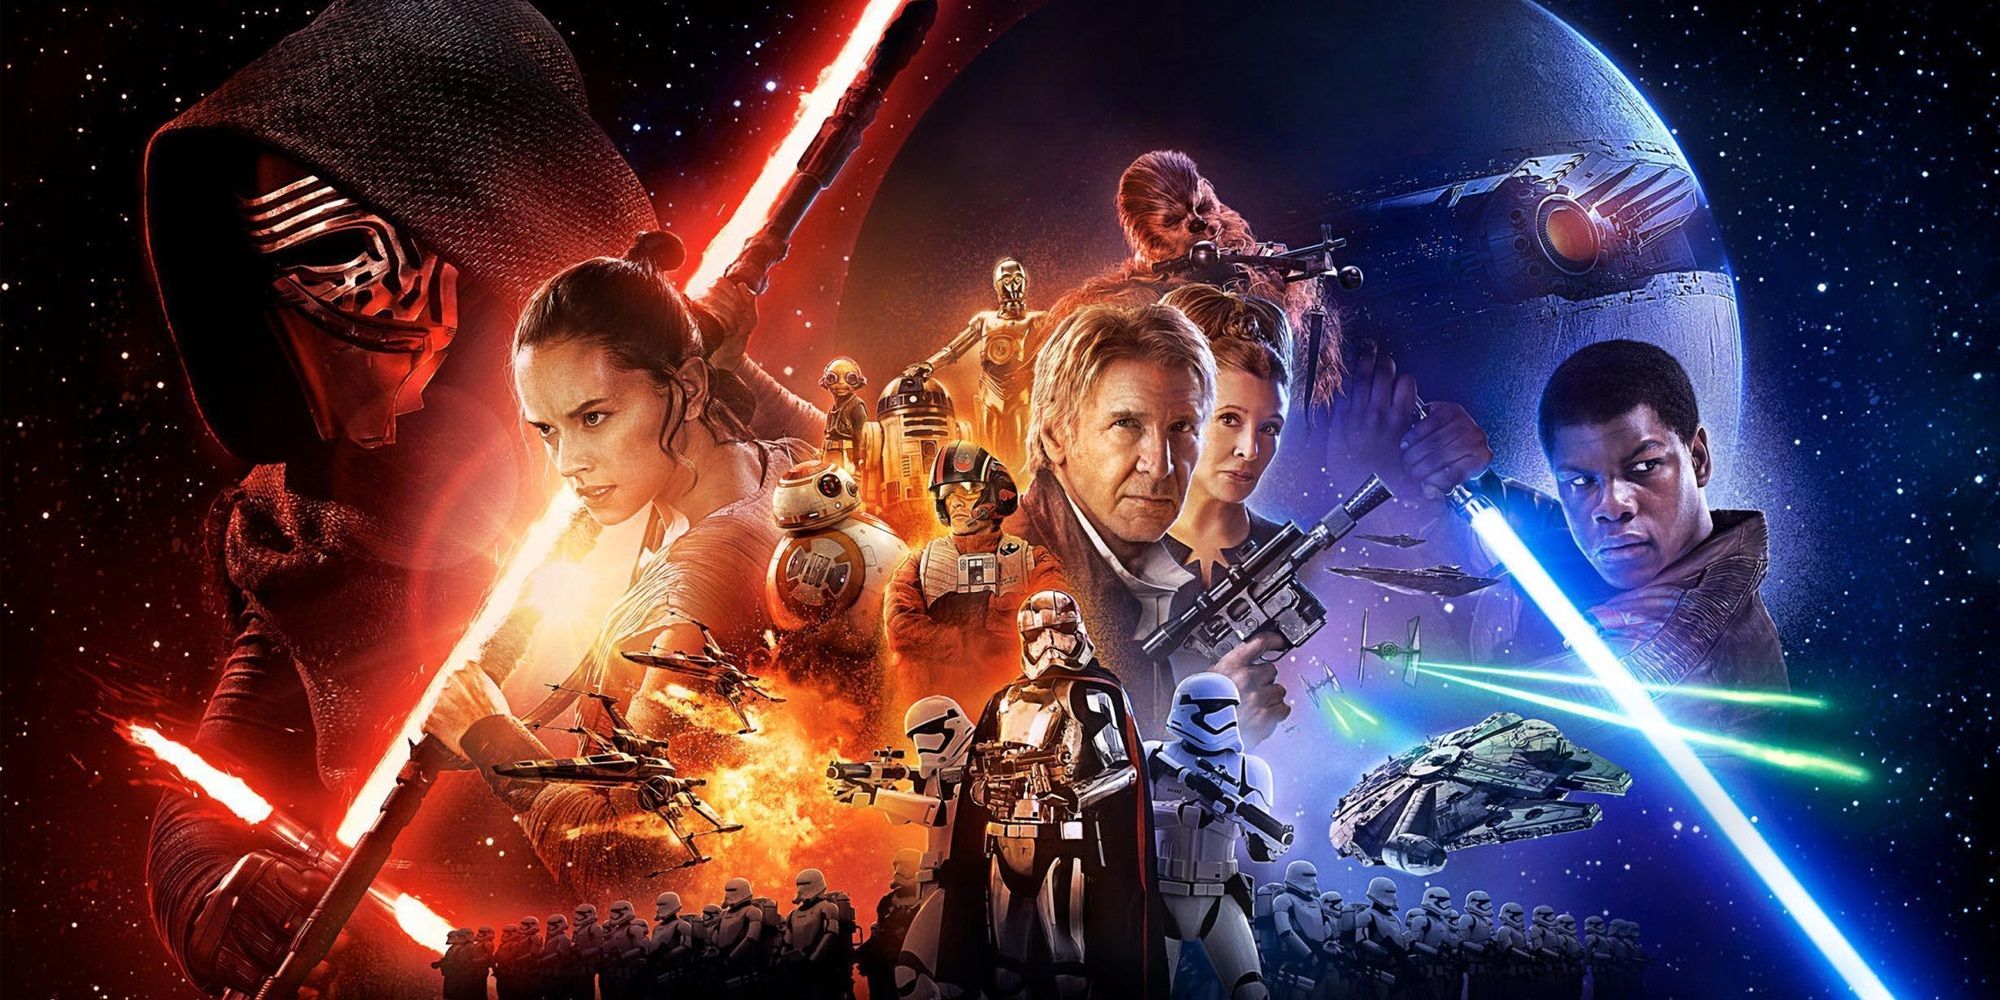 The poster for The Force Awakens